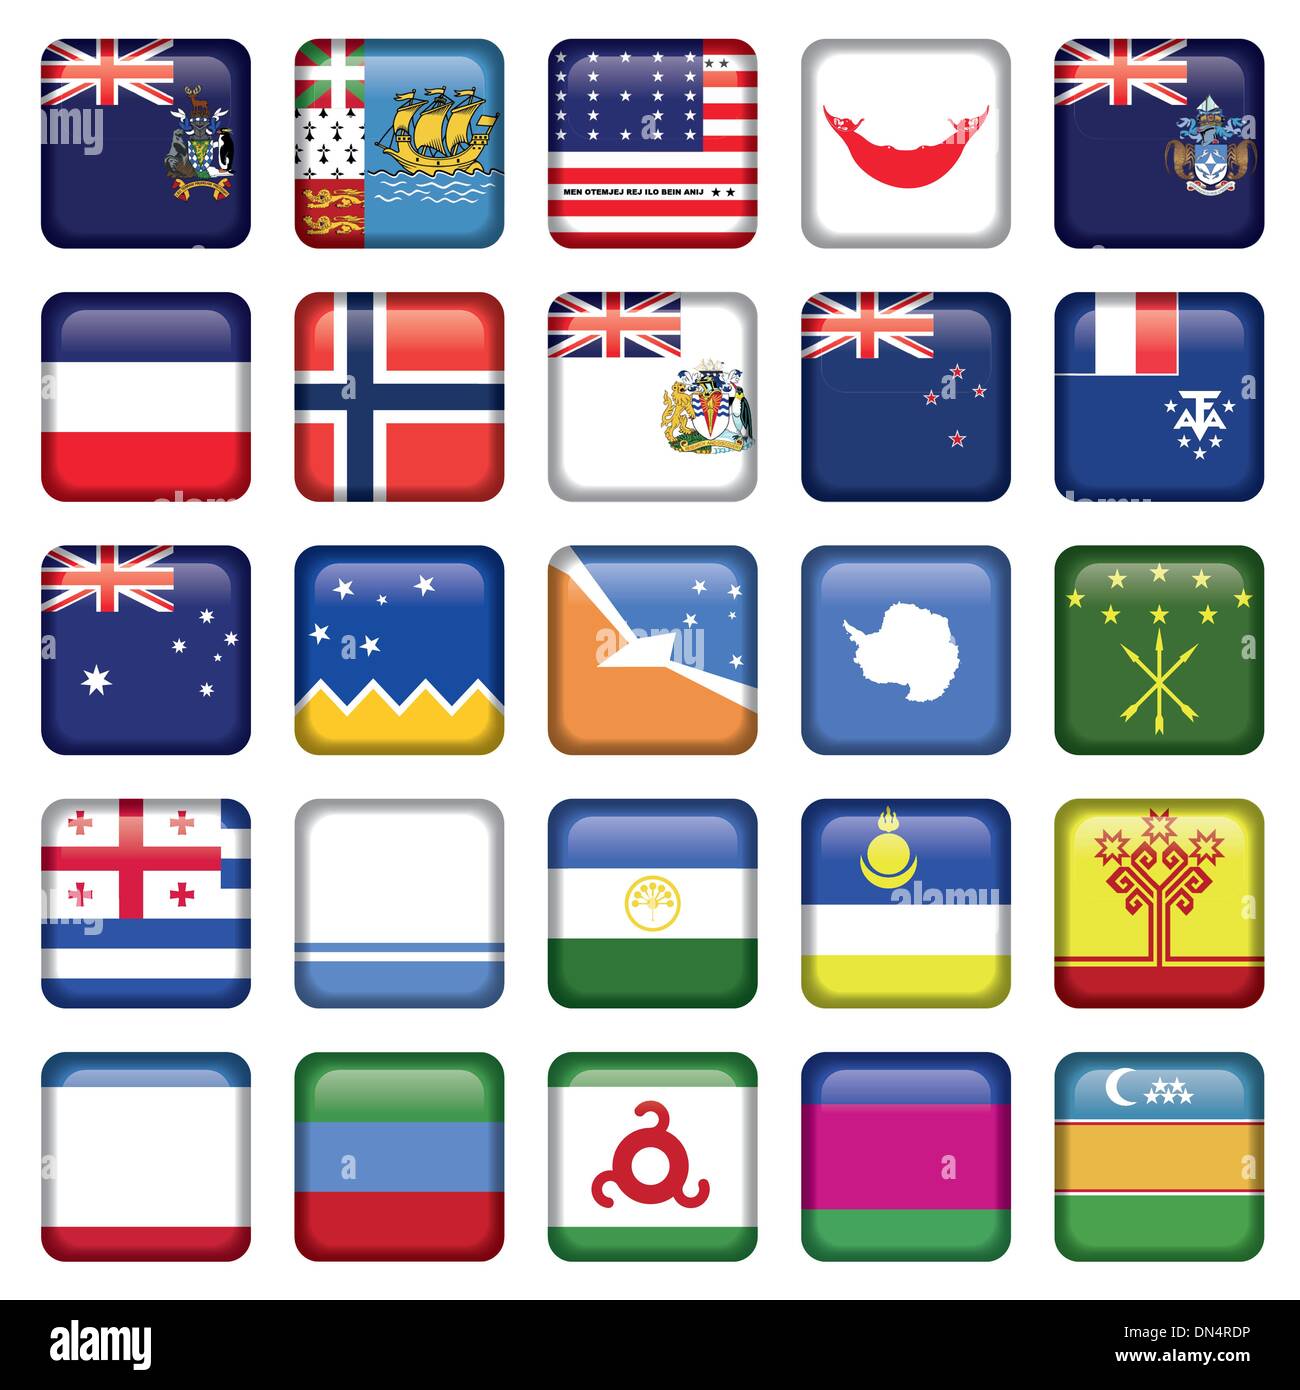 Antarctic and Russian Flags Square Buttons Stock Vector